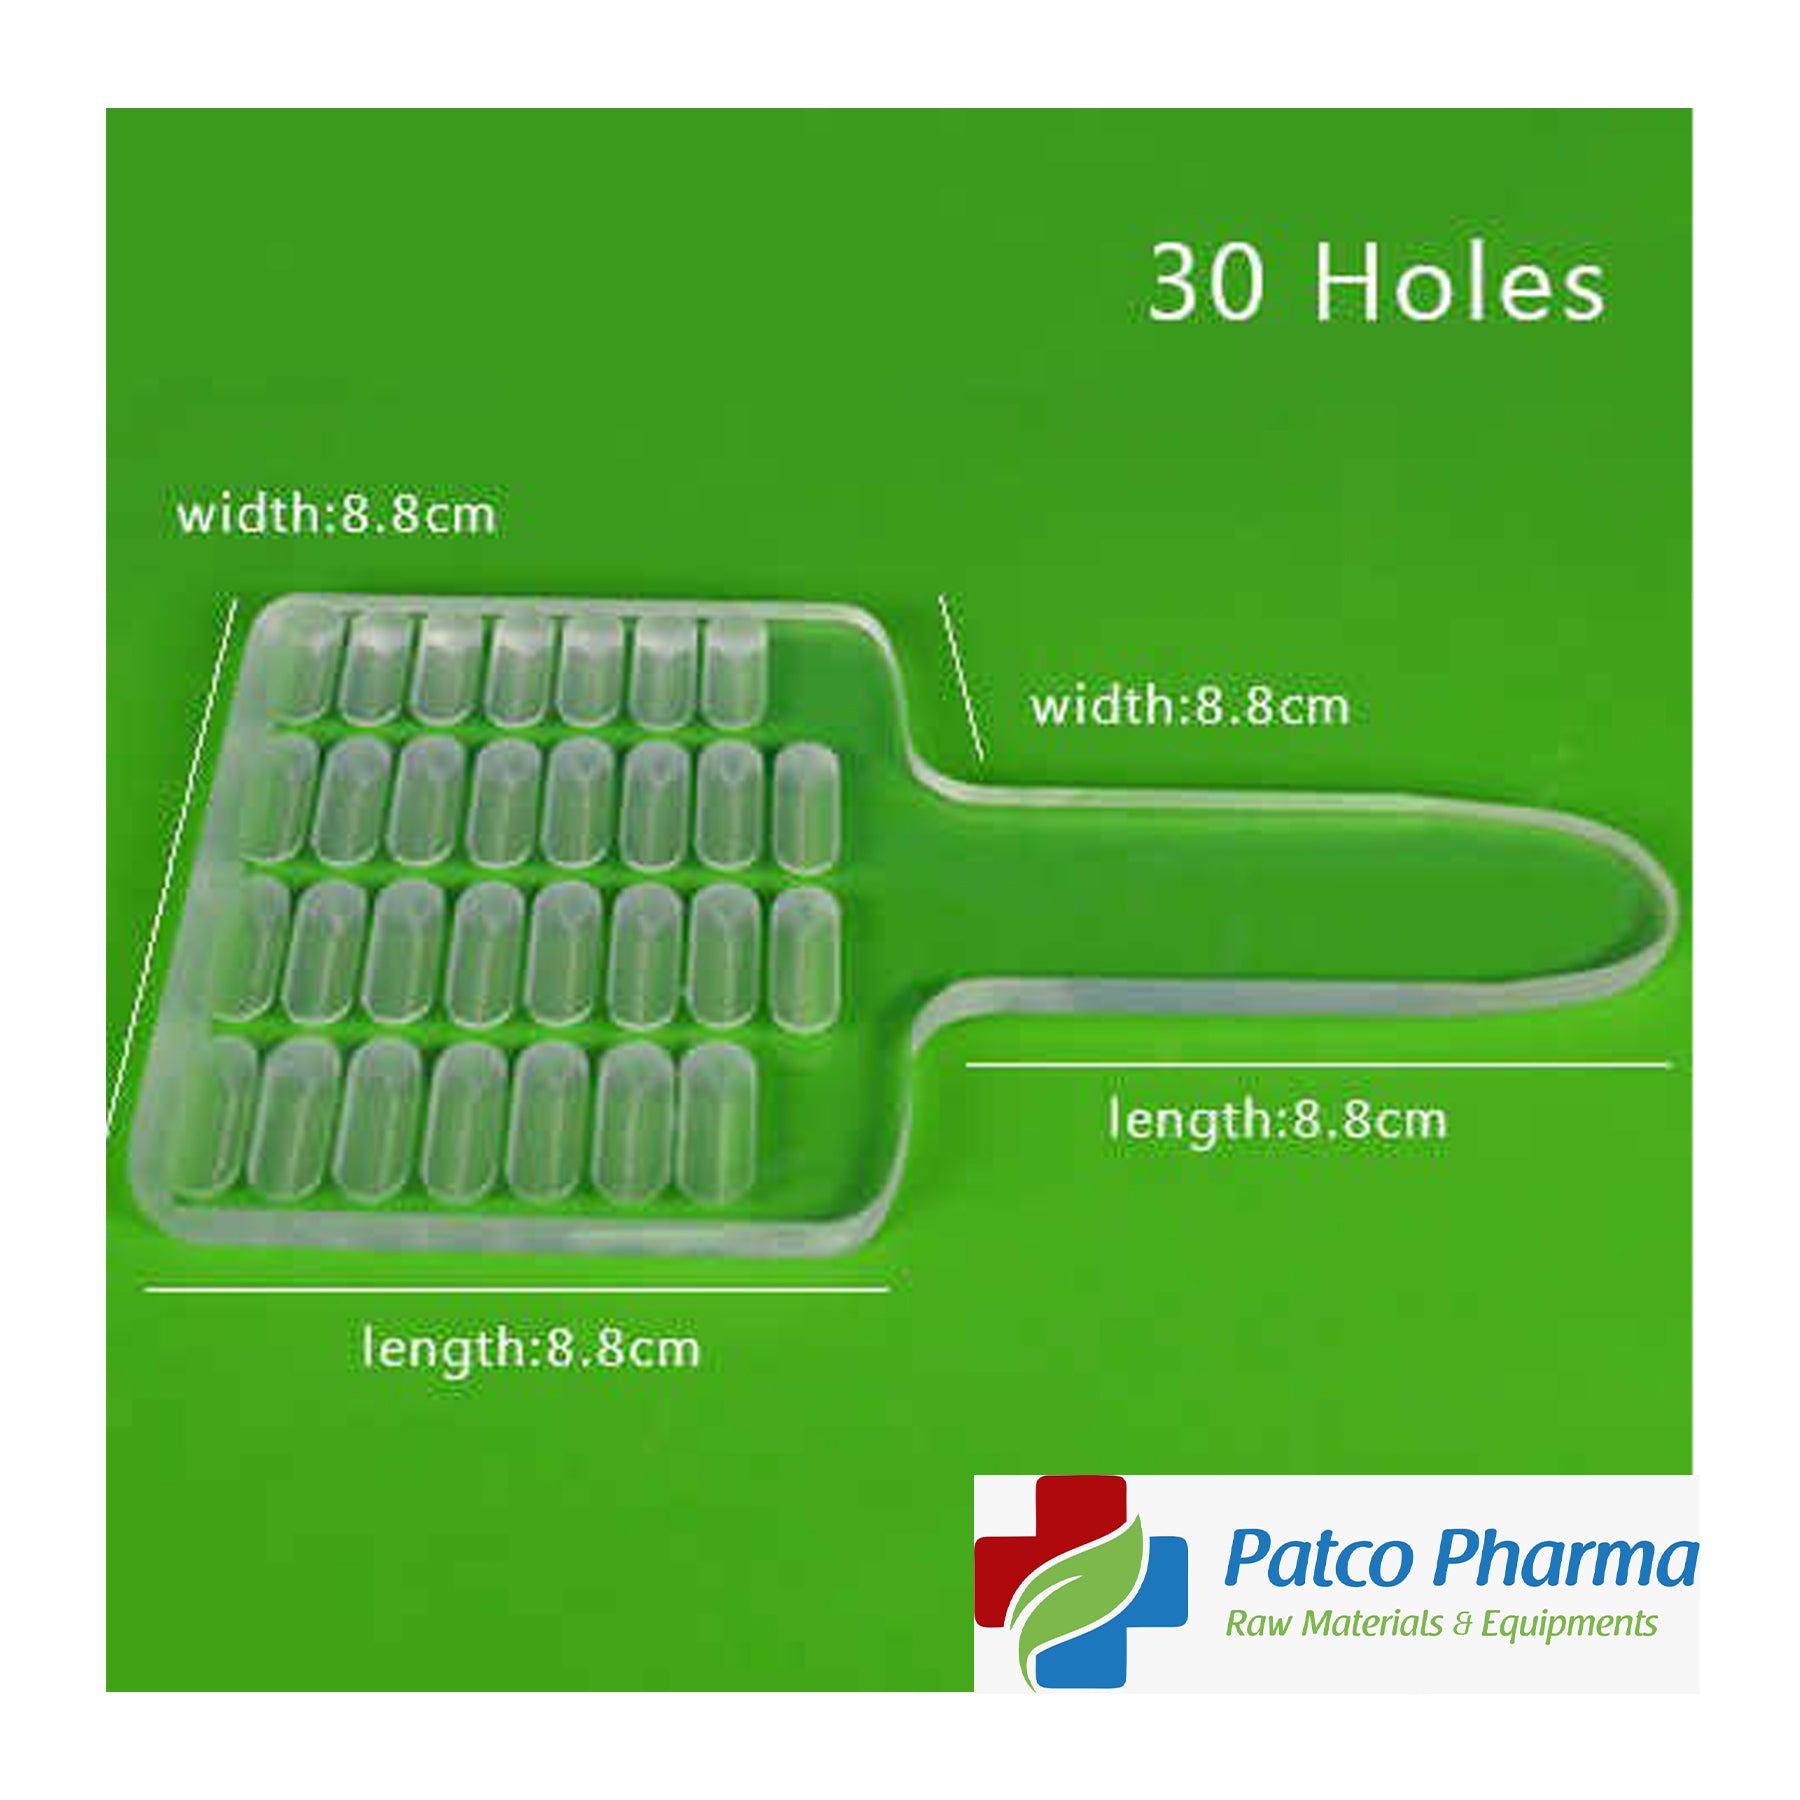 Manual Capsule Counter Count Board/Tray For Size 0 (30 Holes Capsule Counter), Patco Pharma, Capsule Filling Machines & Tools, manual-capsule-counter-count-board-tray-for-size-0-30-holes-capsule-counter, 30 holes, capsule couner, size 0 capsule, Patco Pharma